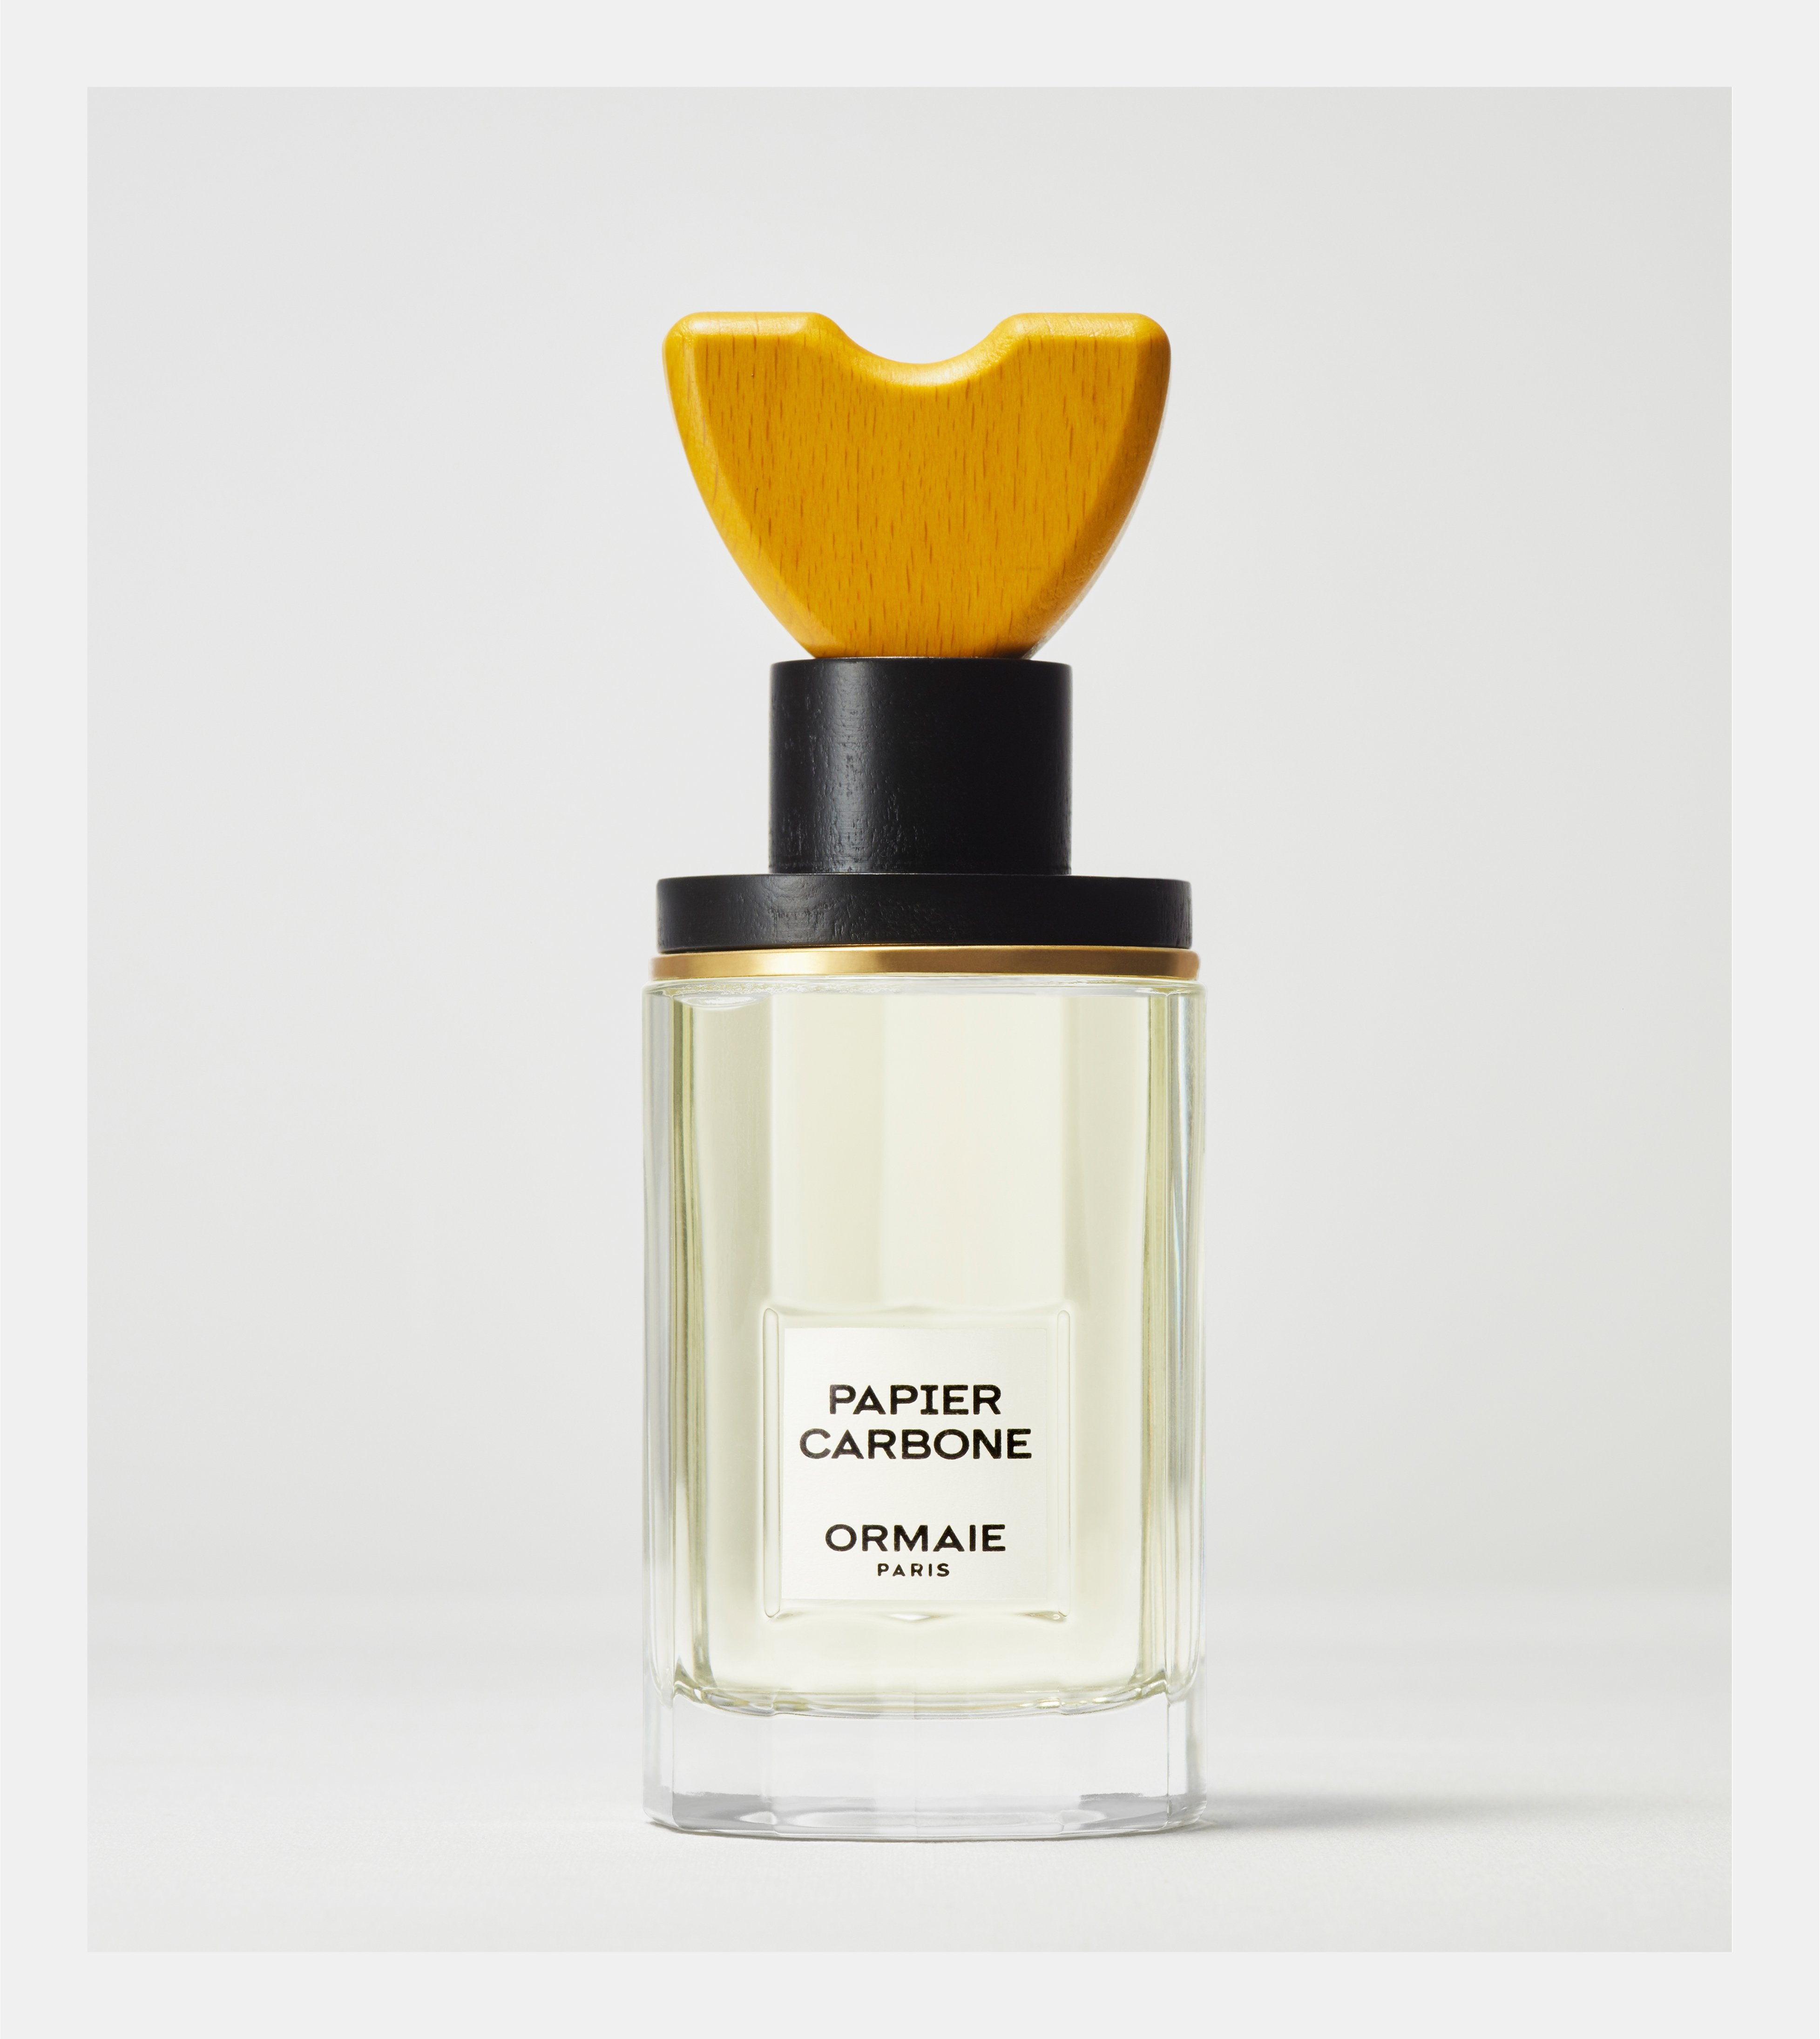 Papier Carbone Ormaie perfume - a fragrance for women and men 2018